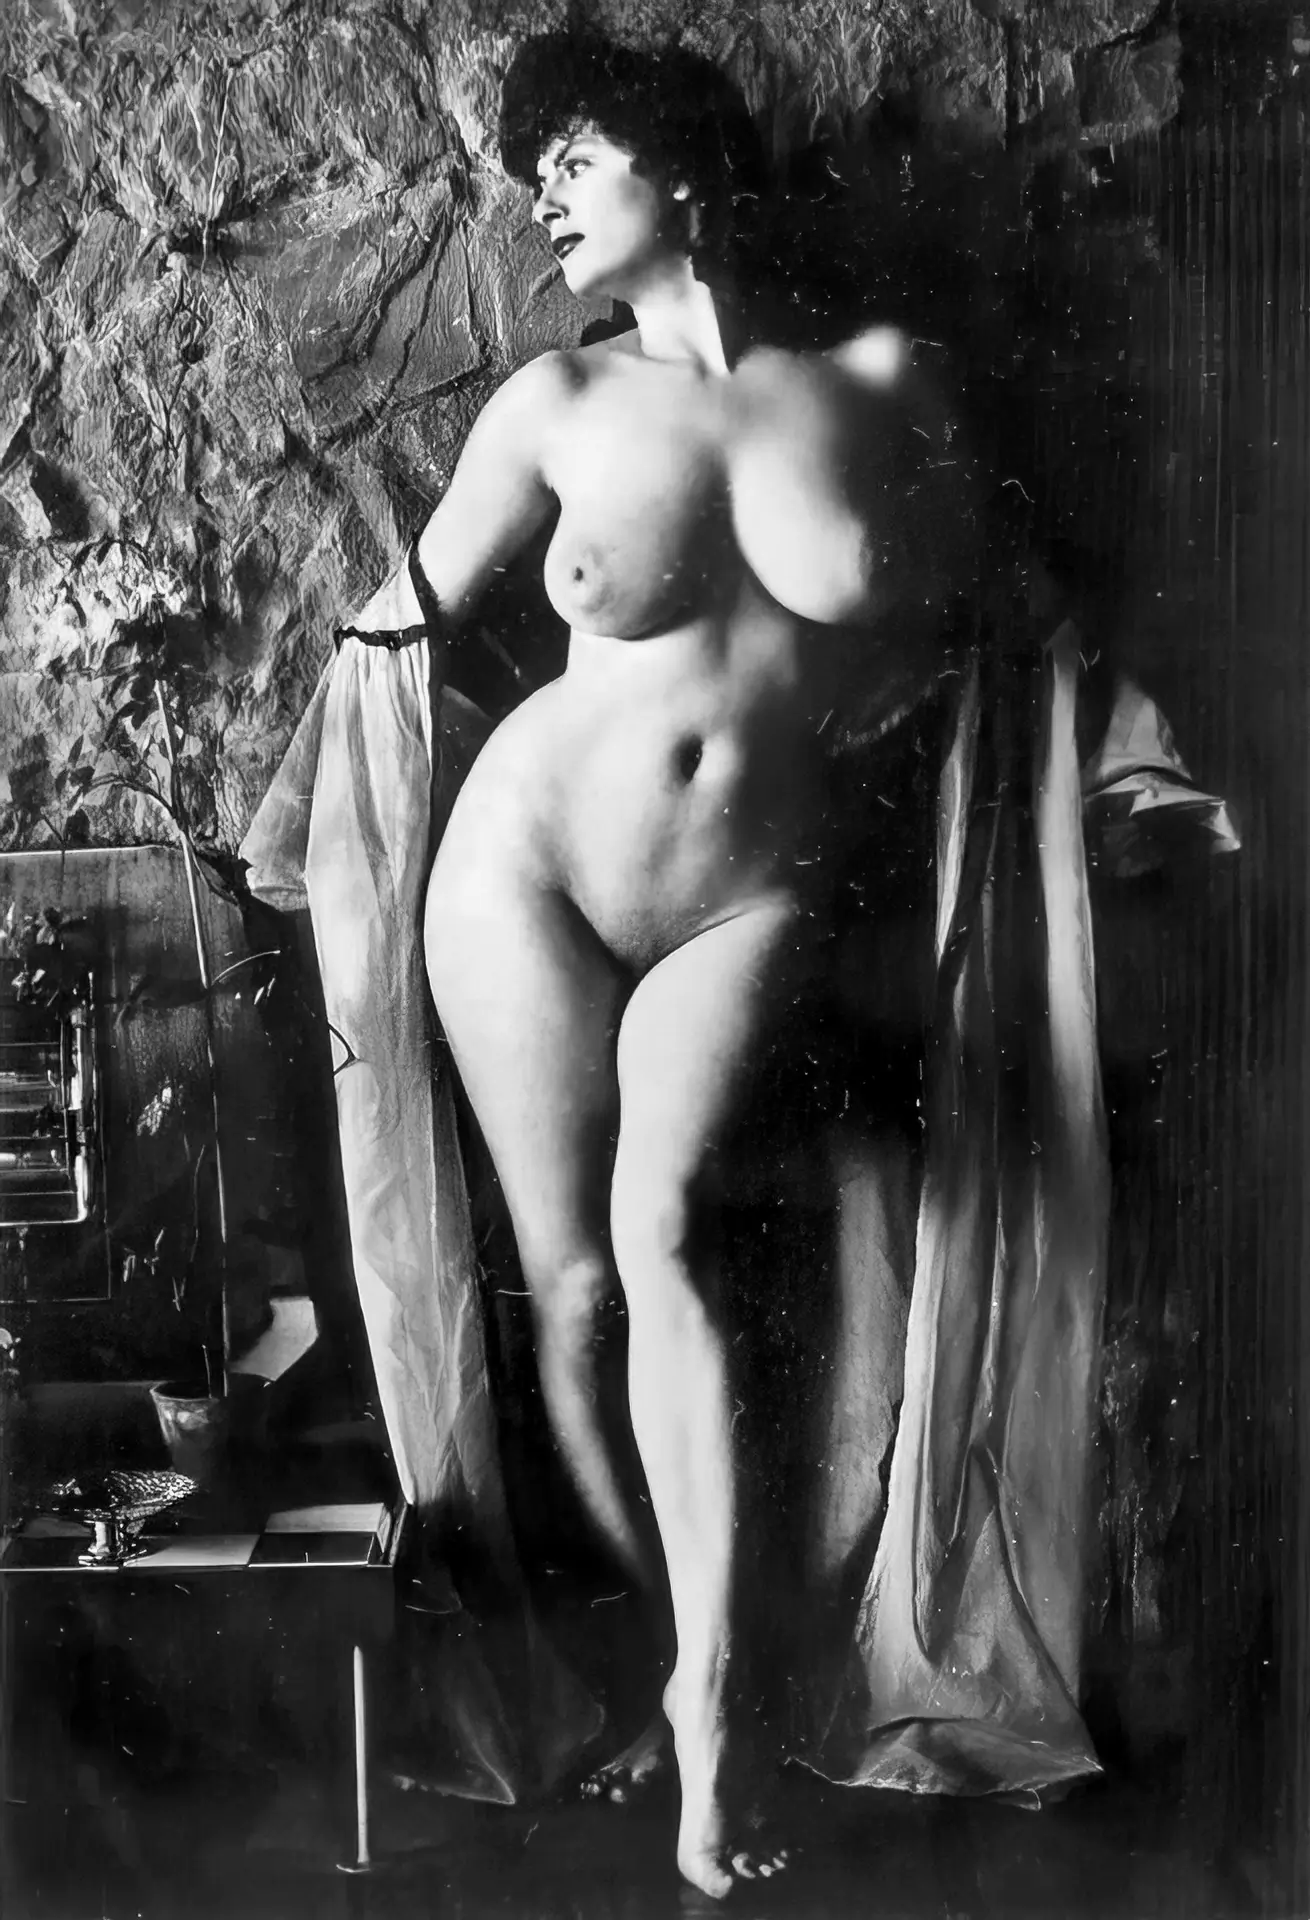 Rosa Domaille takes off the robe to reveal her luscious curves